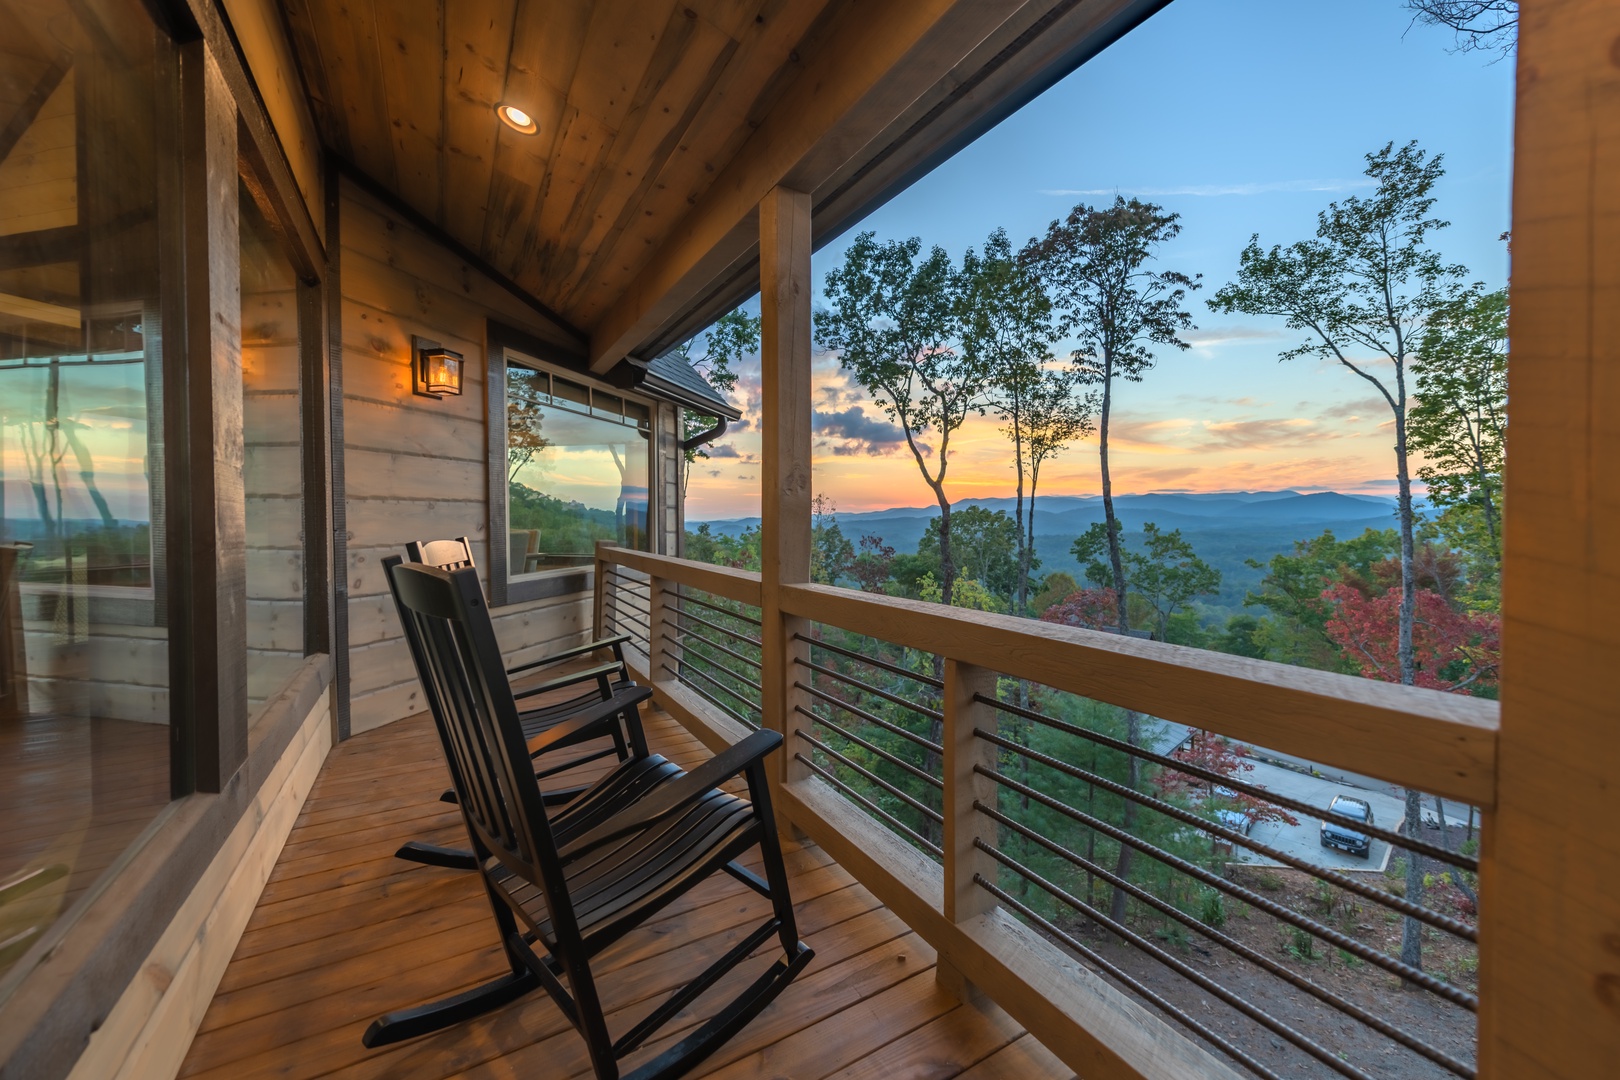 Highland Escape- Covered deck area with outdoor seating and mountain views